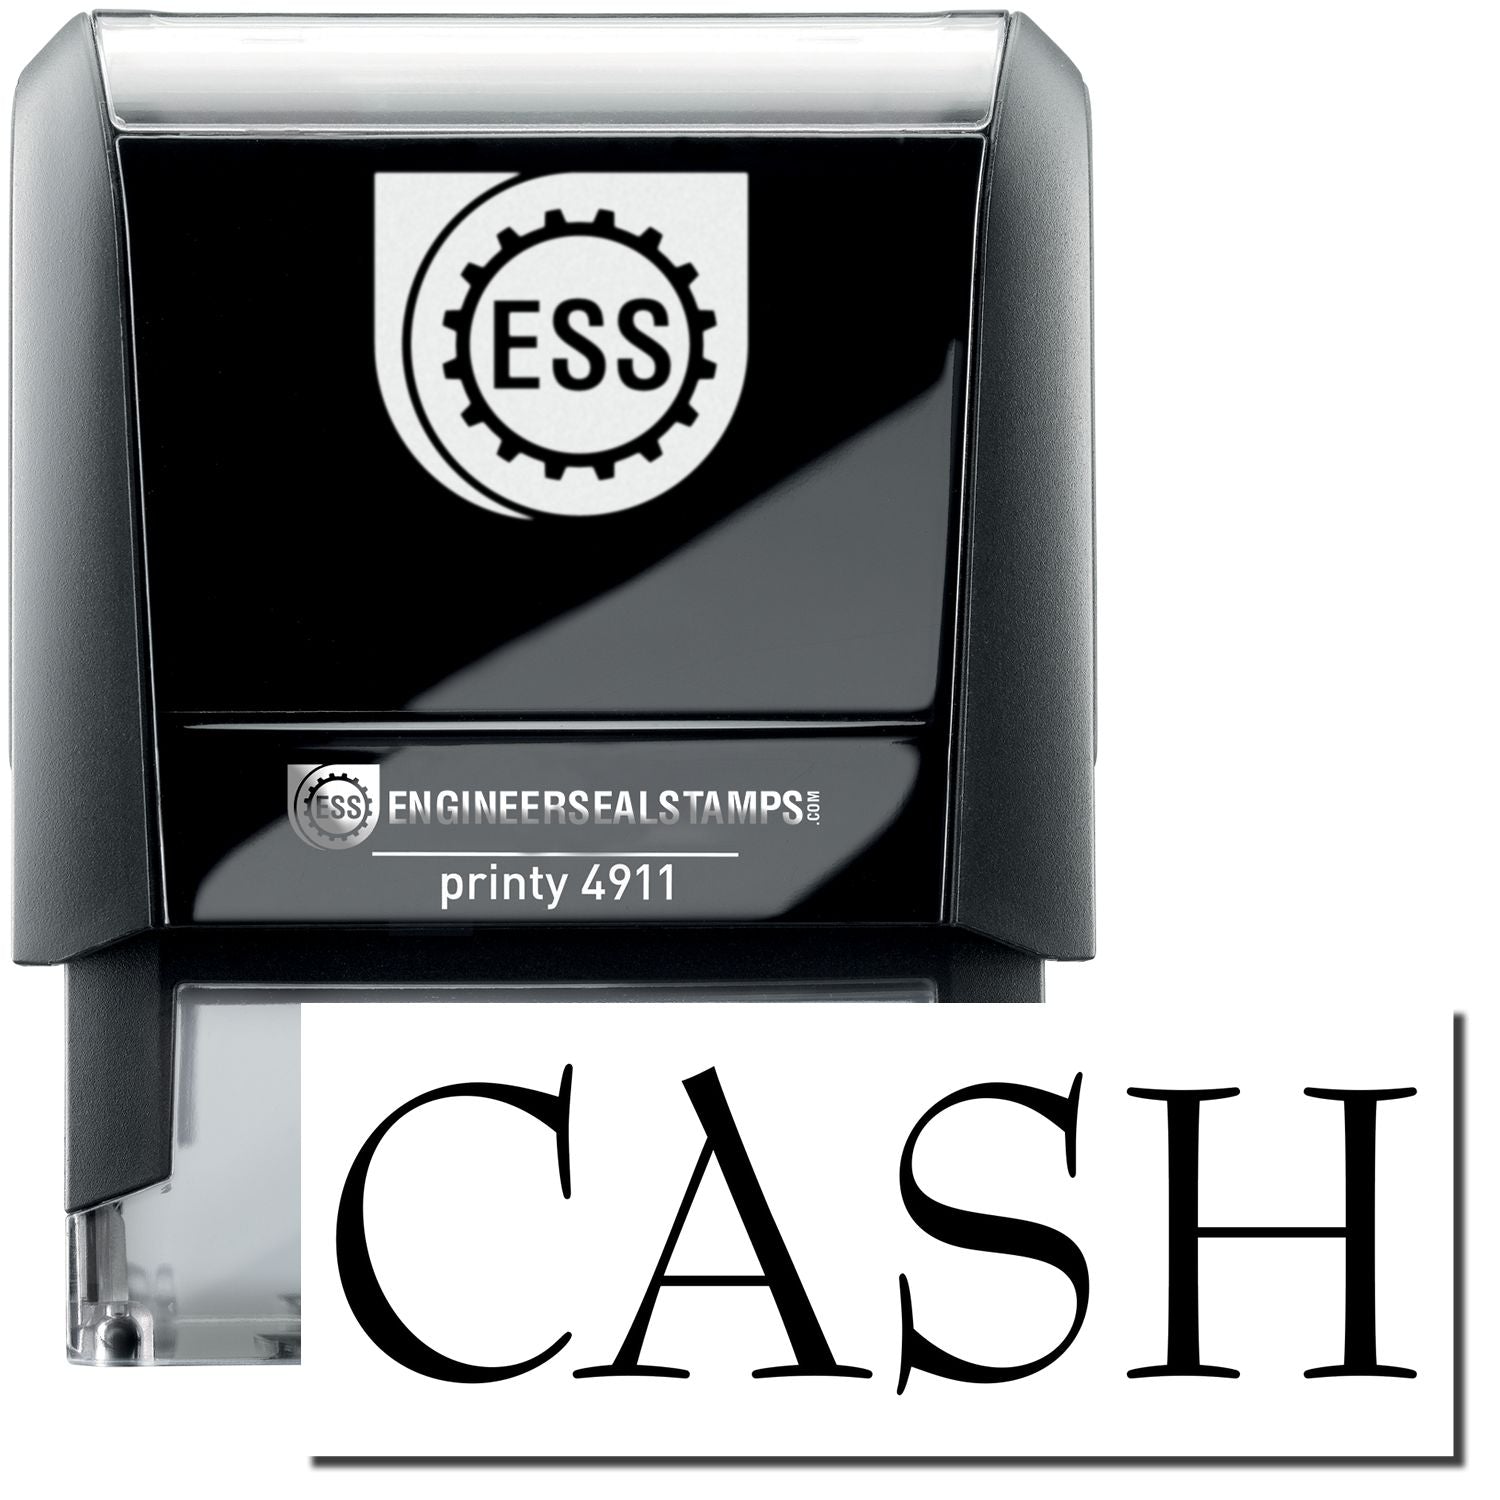 A self-inking stamp with a stamped image showing how the text "CASH" is displayed after stamping.